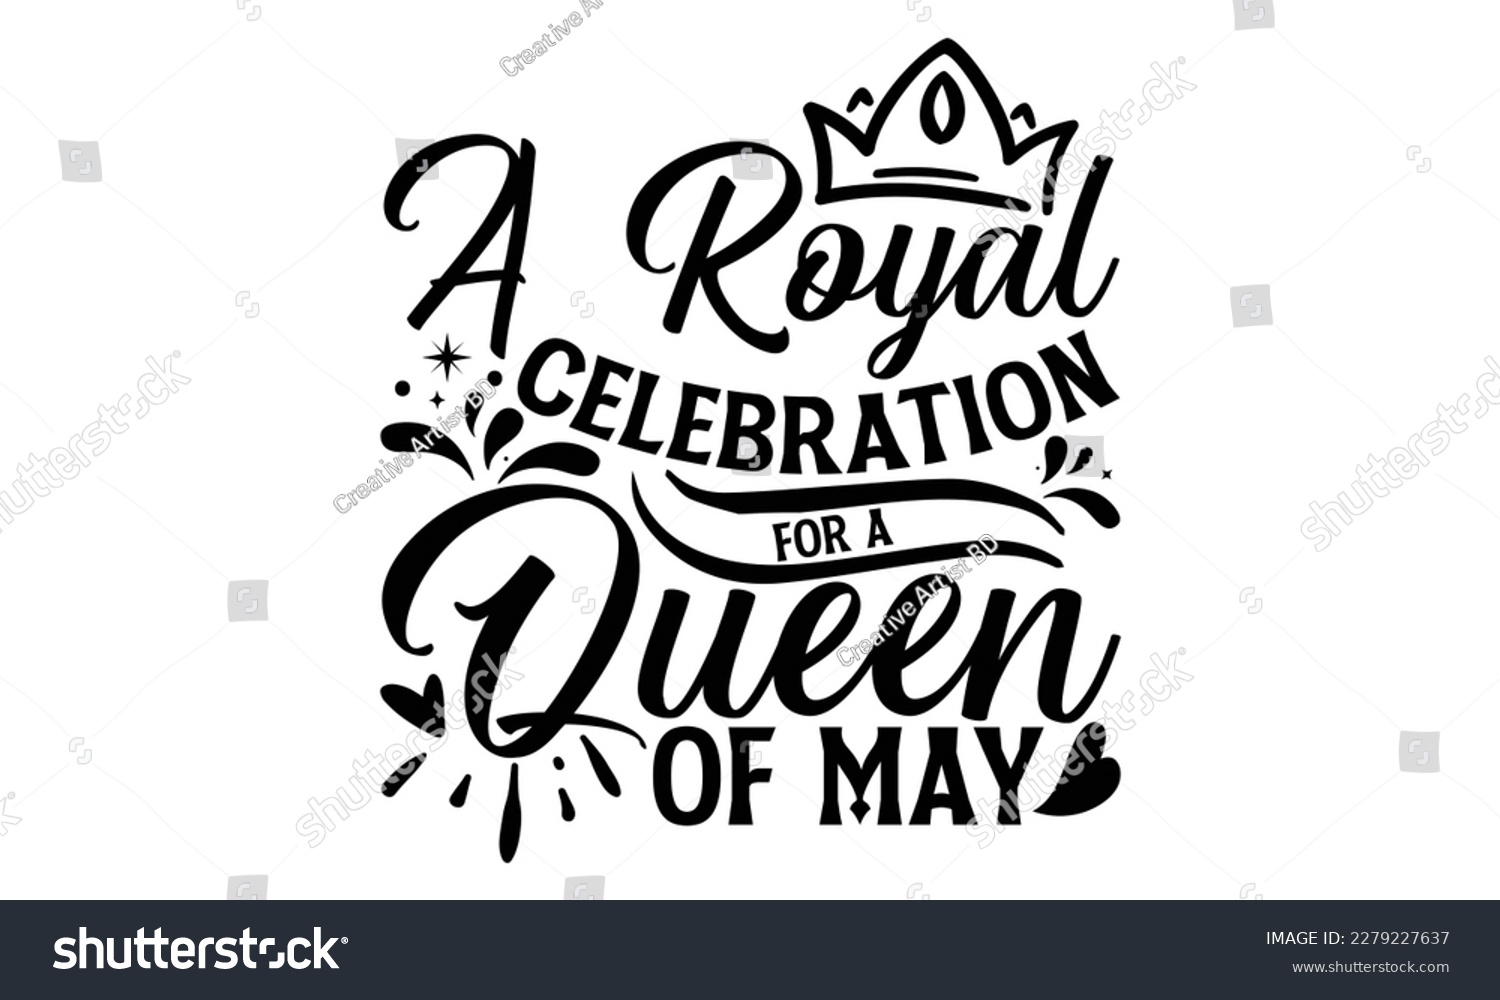 SVG of A Royal Celebration For A Queen Of May - Victoria Day T Shirt Design, Hand lettering illustration for your design, svg cut file, svg file, Modern, simple, lettering. svg